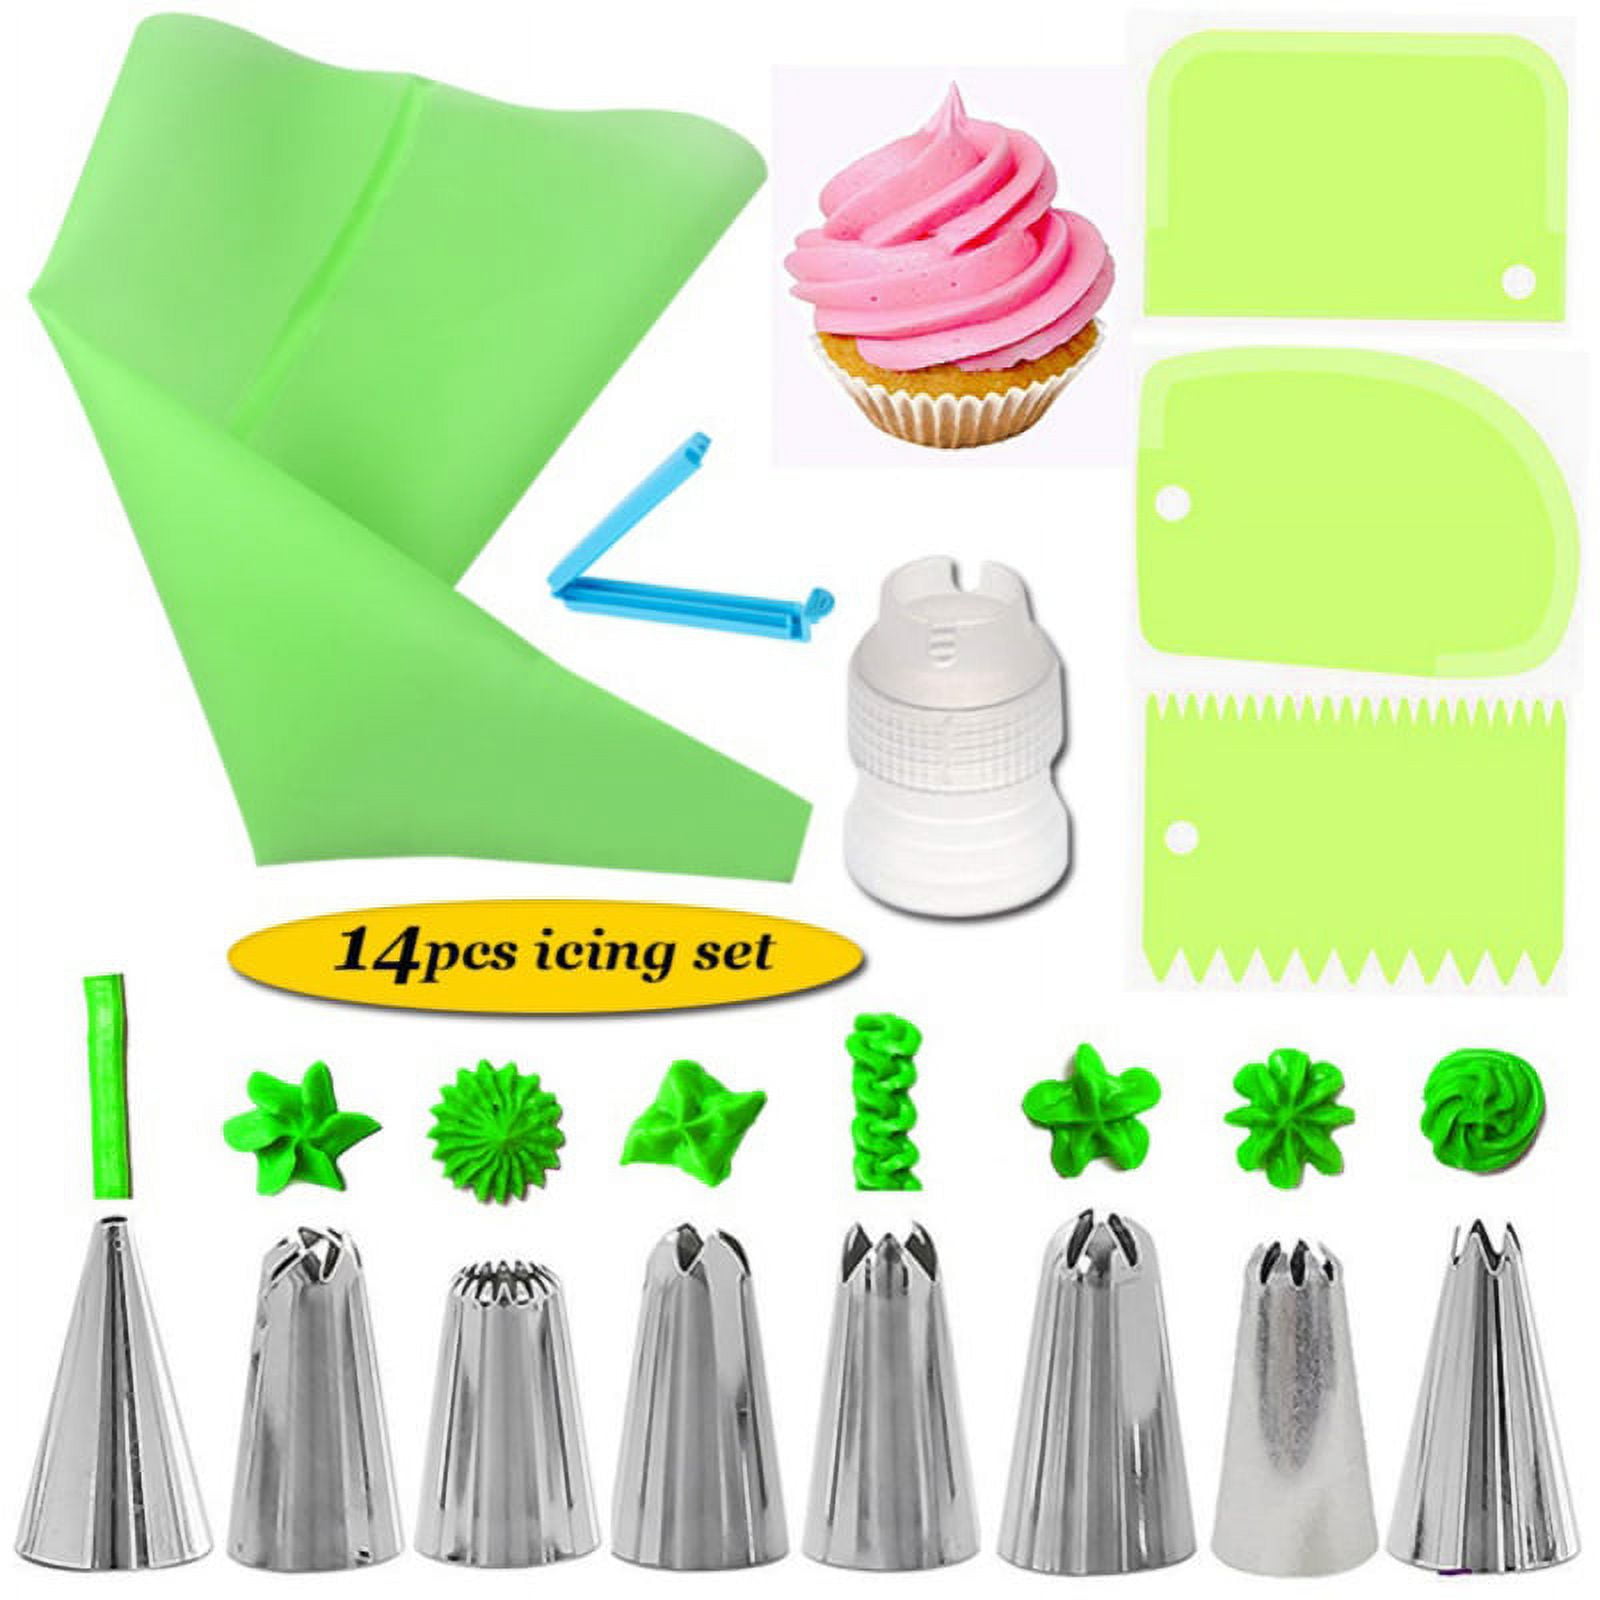 Silicone Piping Bag, Built-in Coupler & 8 Nozzles | Lakeland